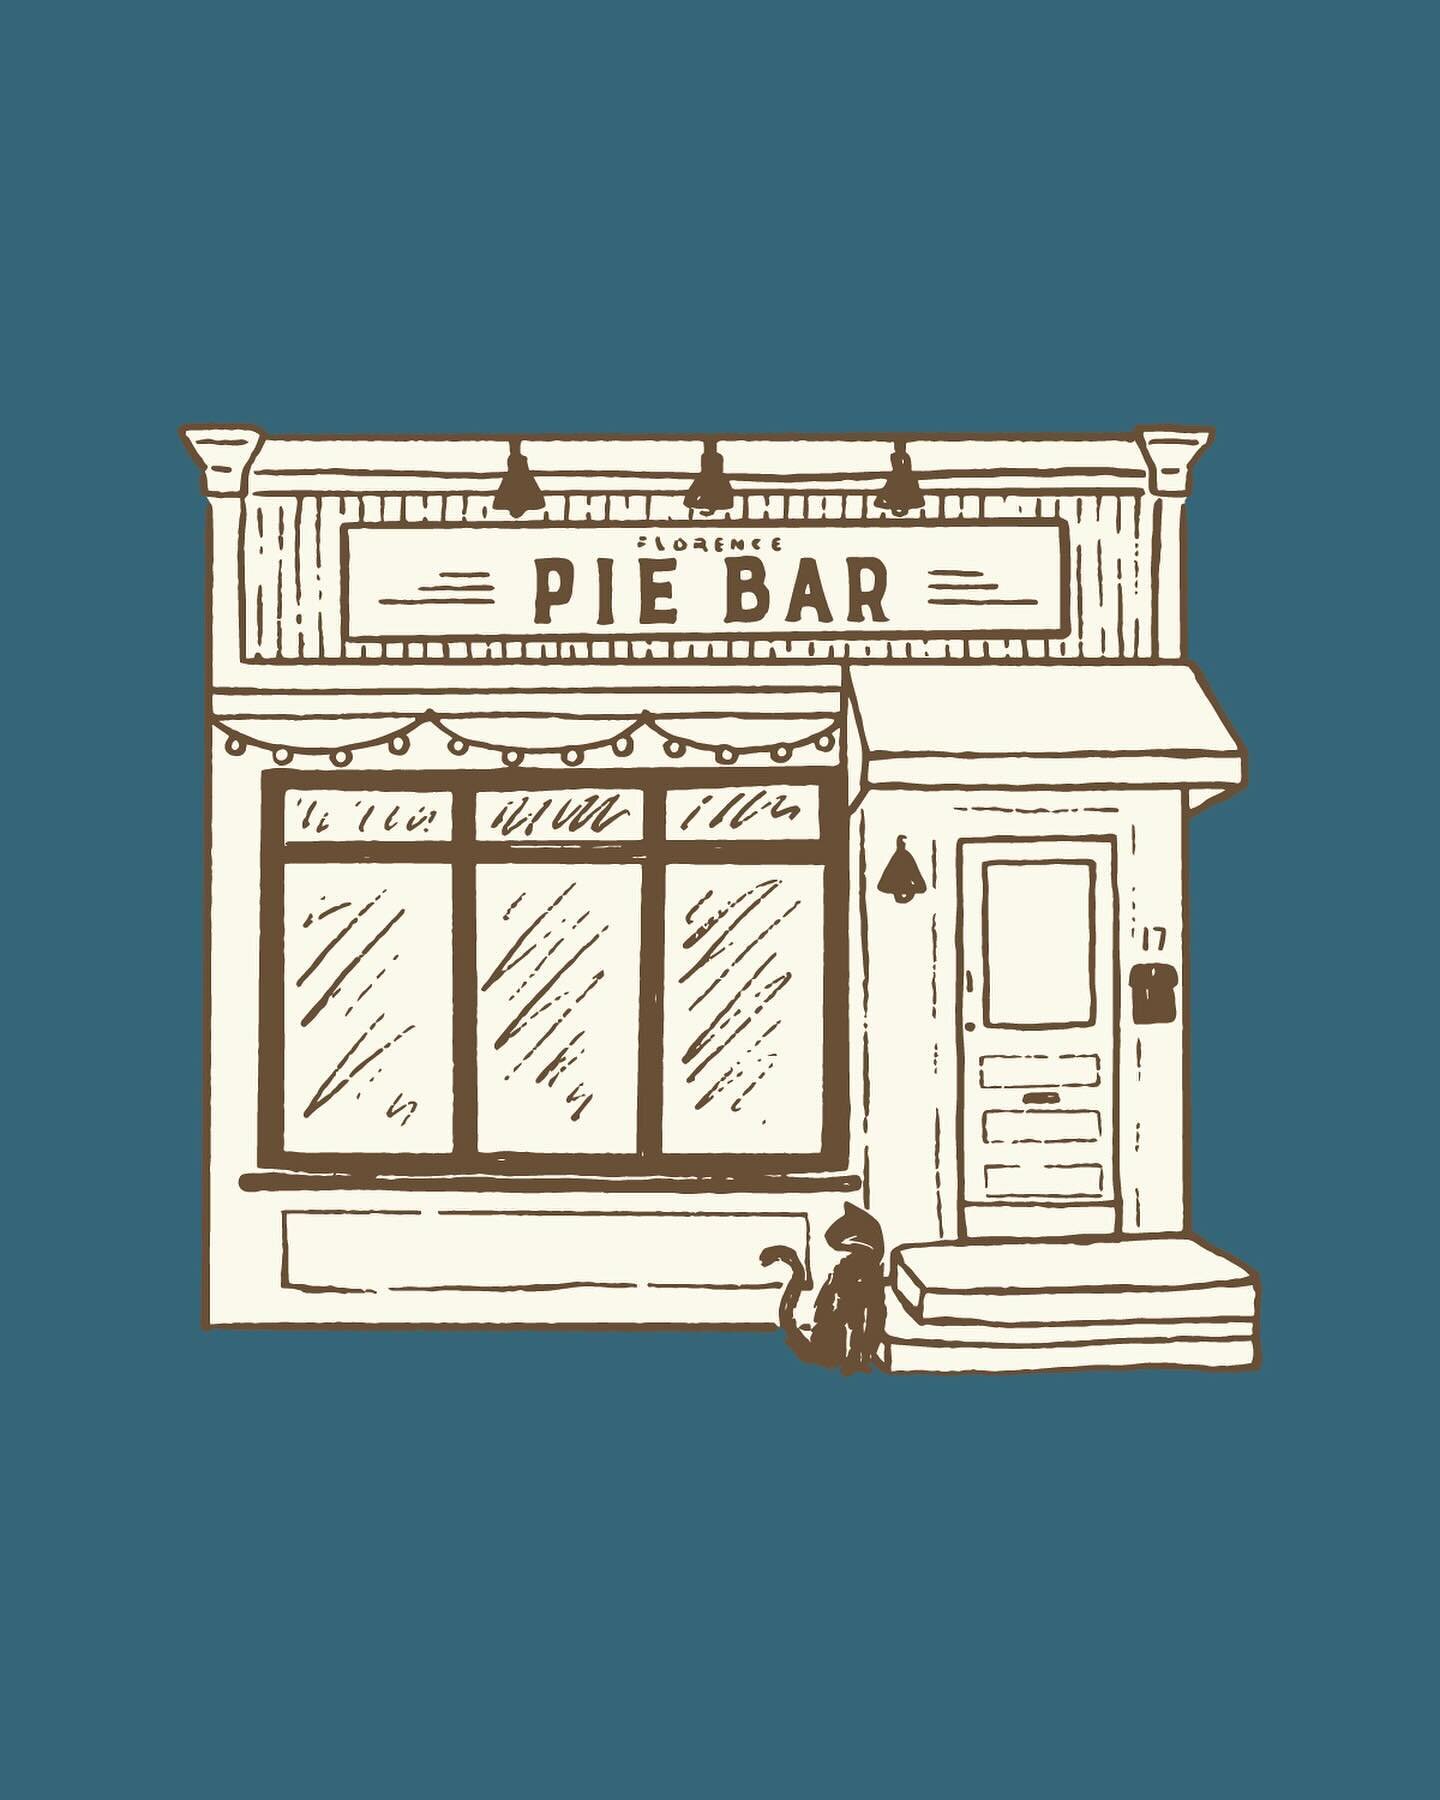 Allllll of the cute little illustrations from our branding work for @florencepiebar - including the iconic storefront, a few sexy pie ladies, and all of your favorite Pie Bar treats. Read all about this one over on the blog - link in bio! 🥧💕☕️